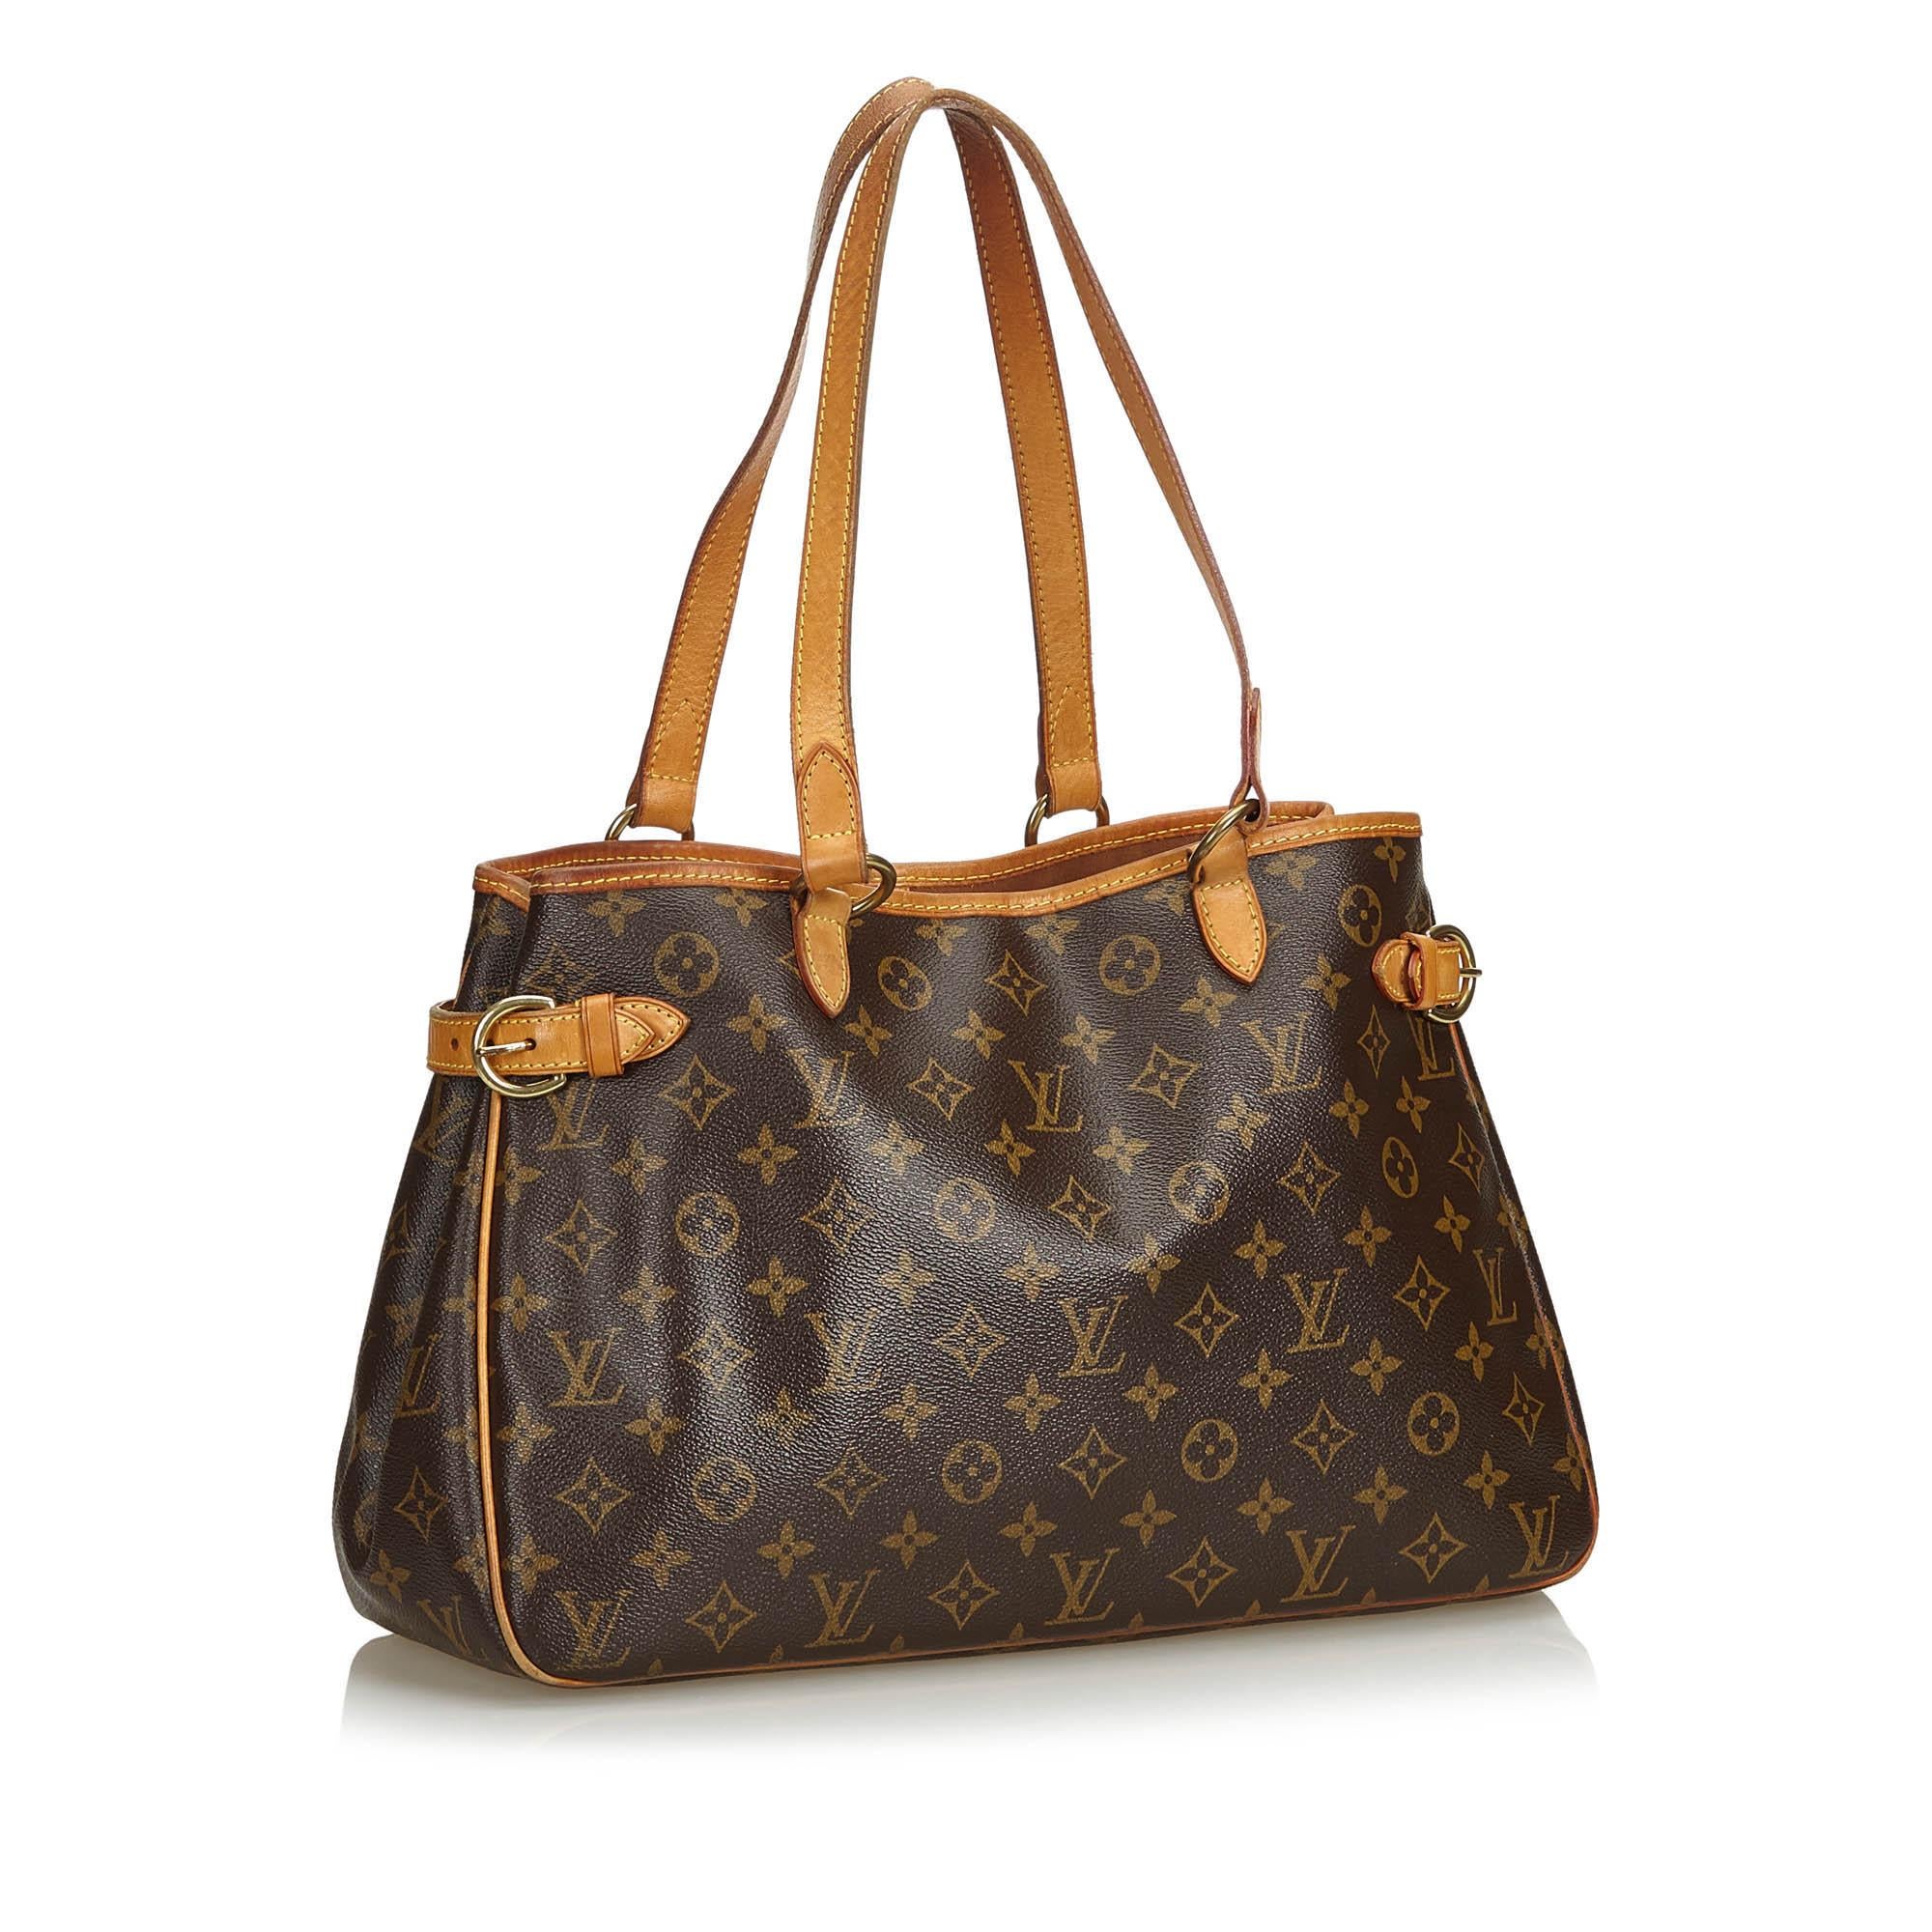 The Batignolles Horizontal features a monogram canvas body with leather belt details, flat leather straps, a top lobster claw clasp closure, and interior zip and open pockets. It carries as B condition rating.

Inclusions: 
Dust Bag

Louis Vuitton